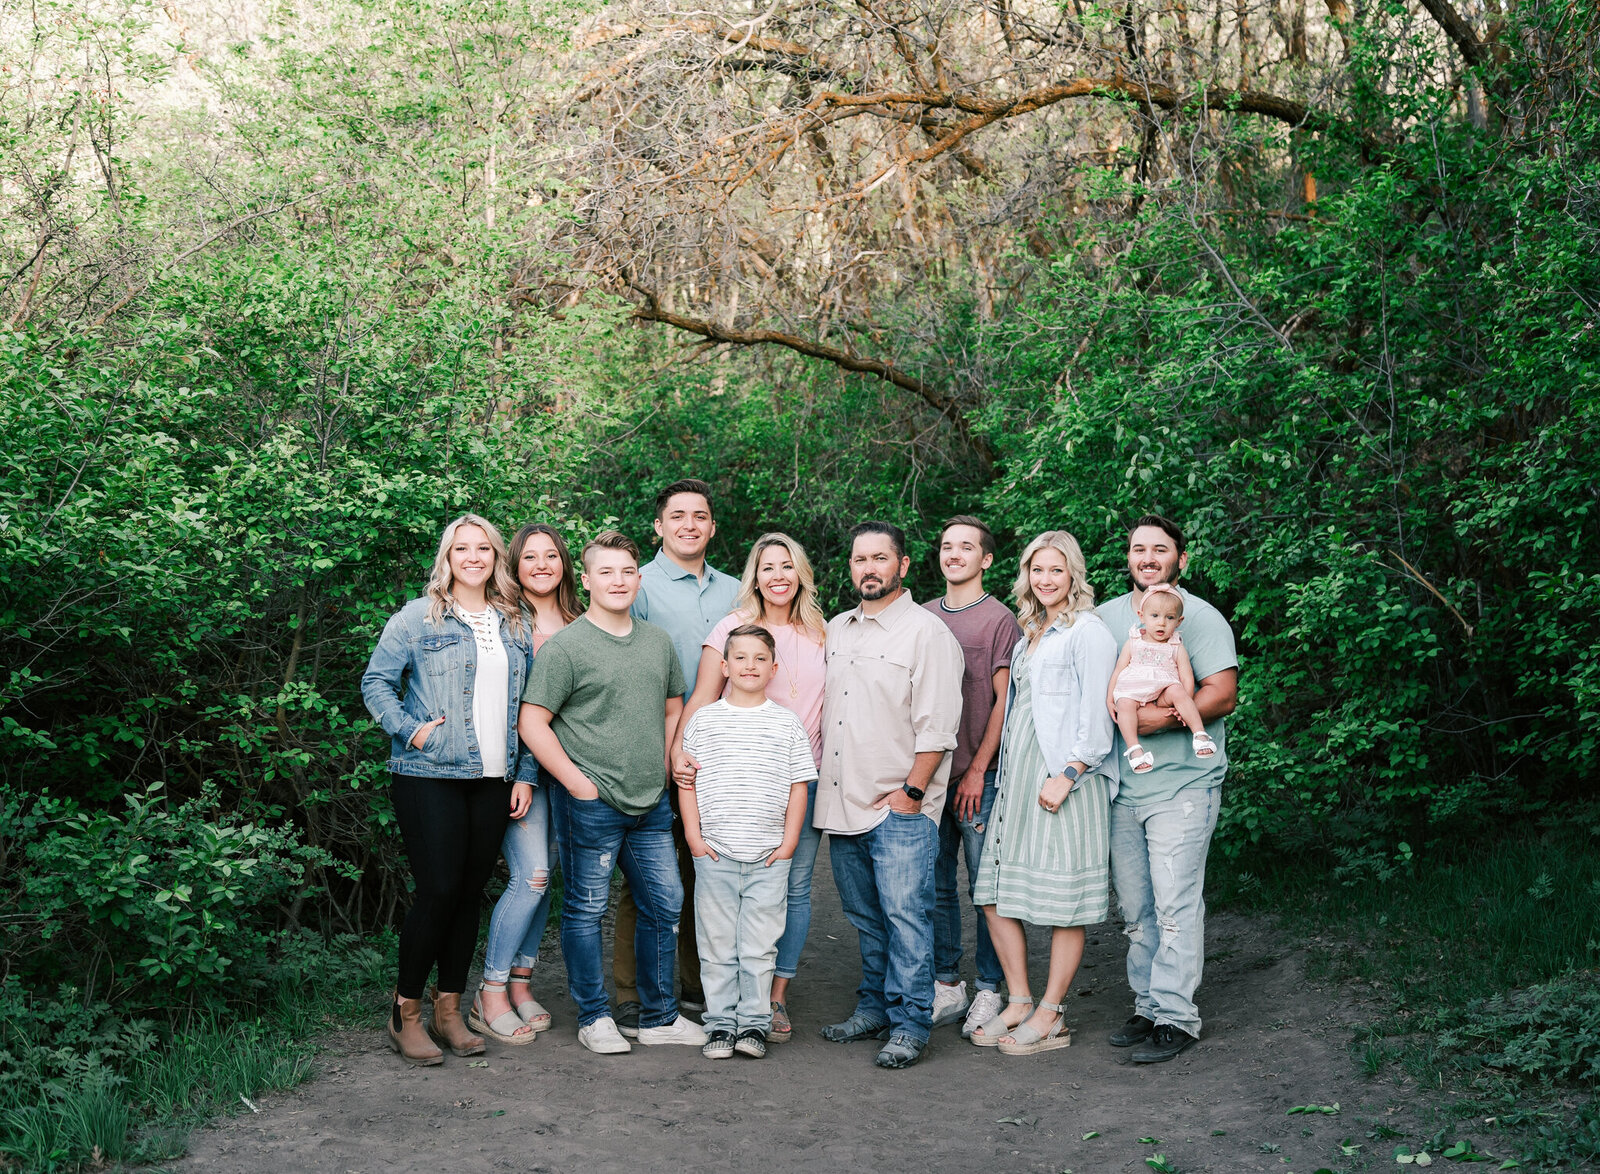 Large family group poses Stock Photos and Images | agefotostock